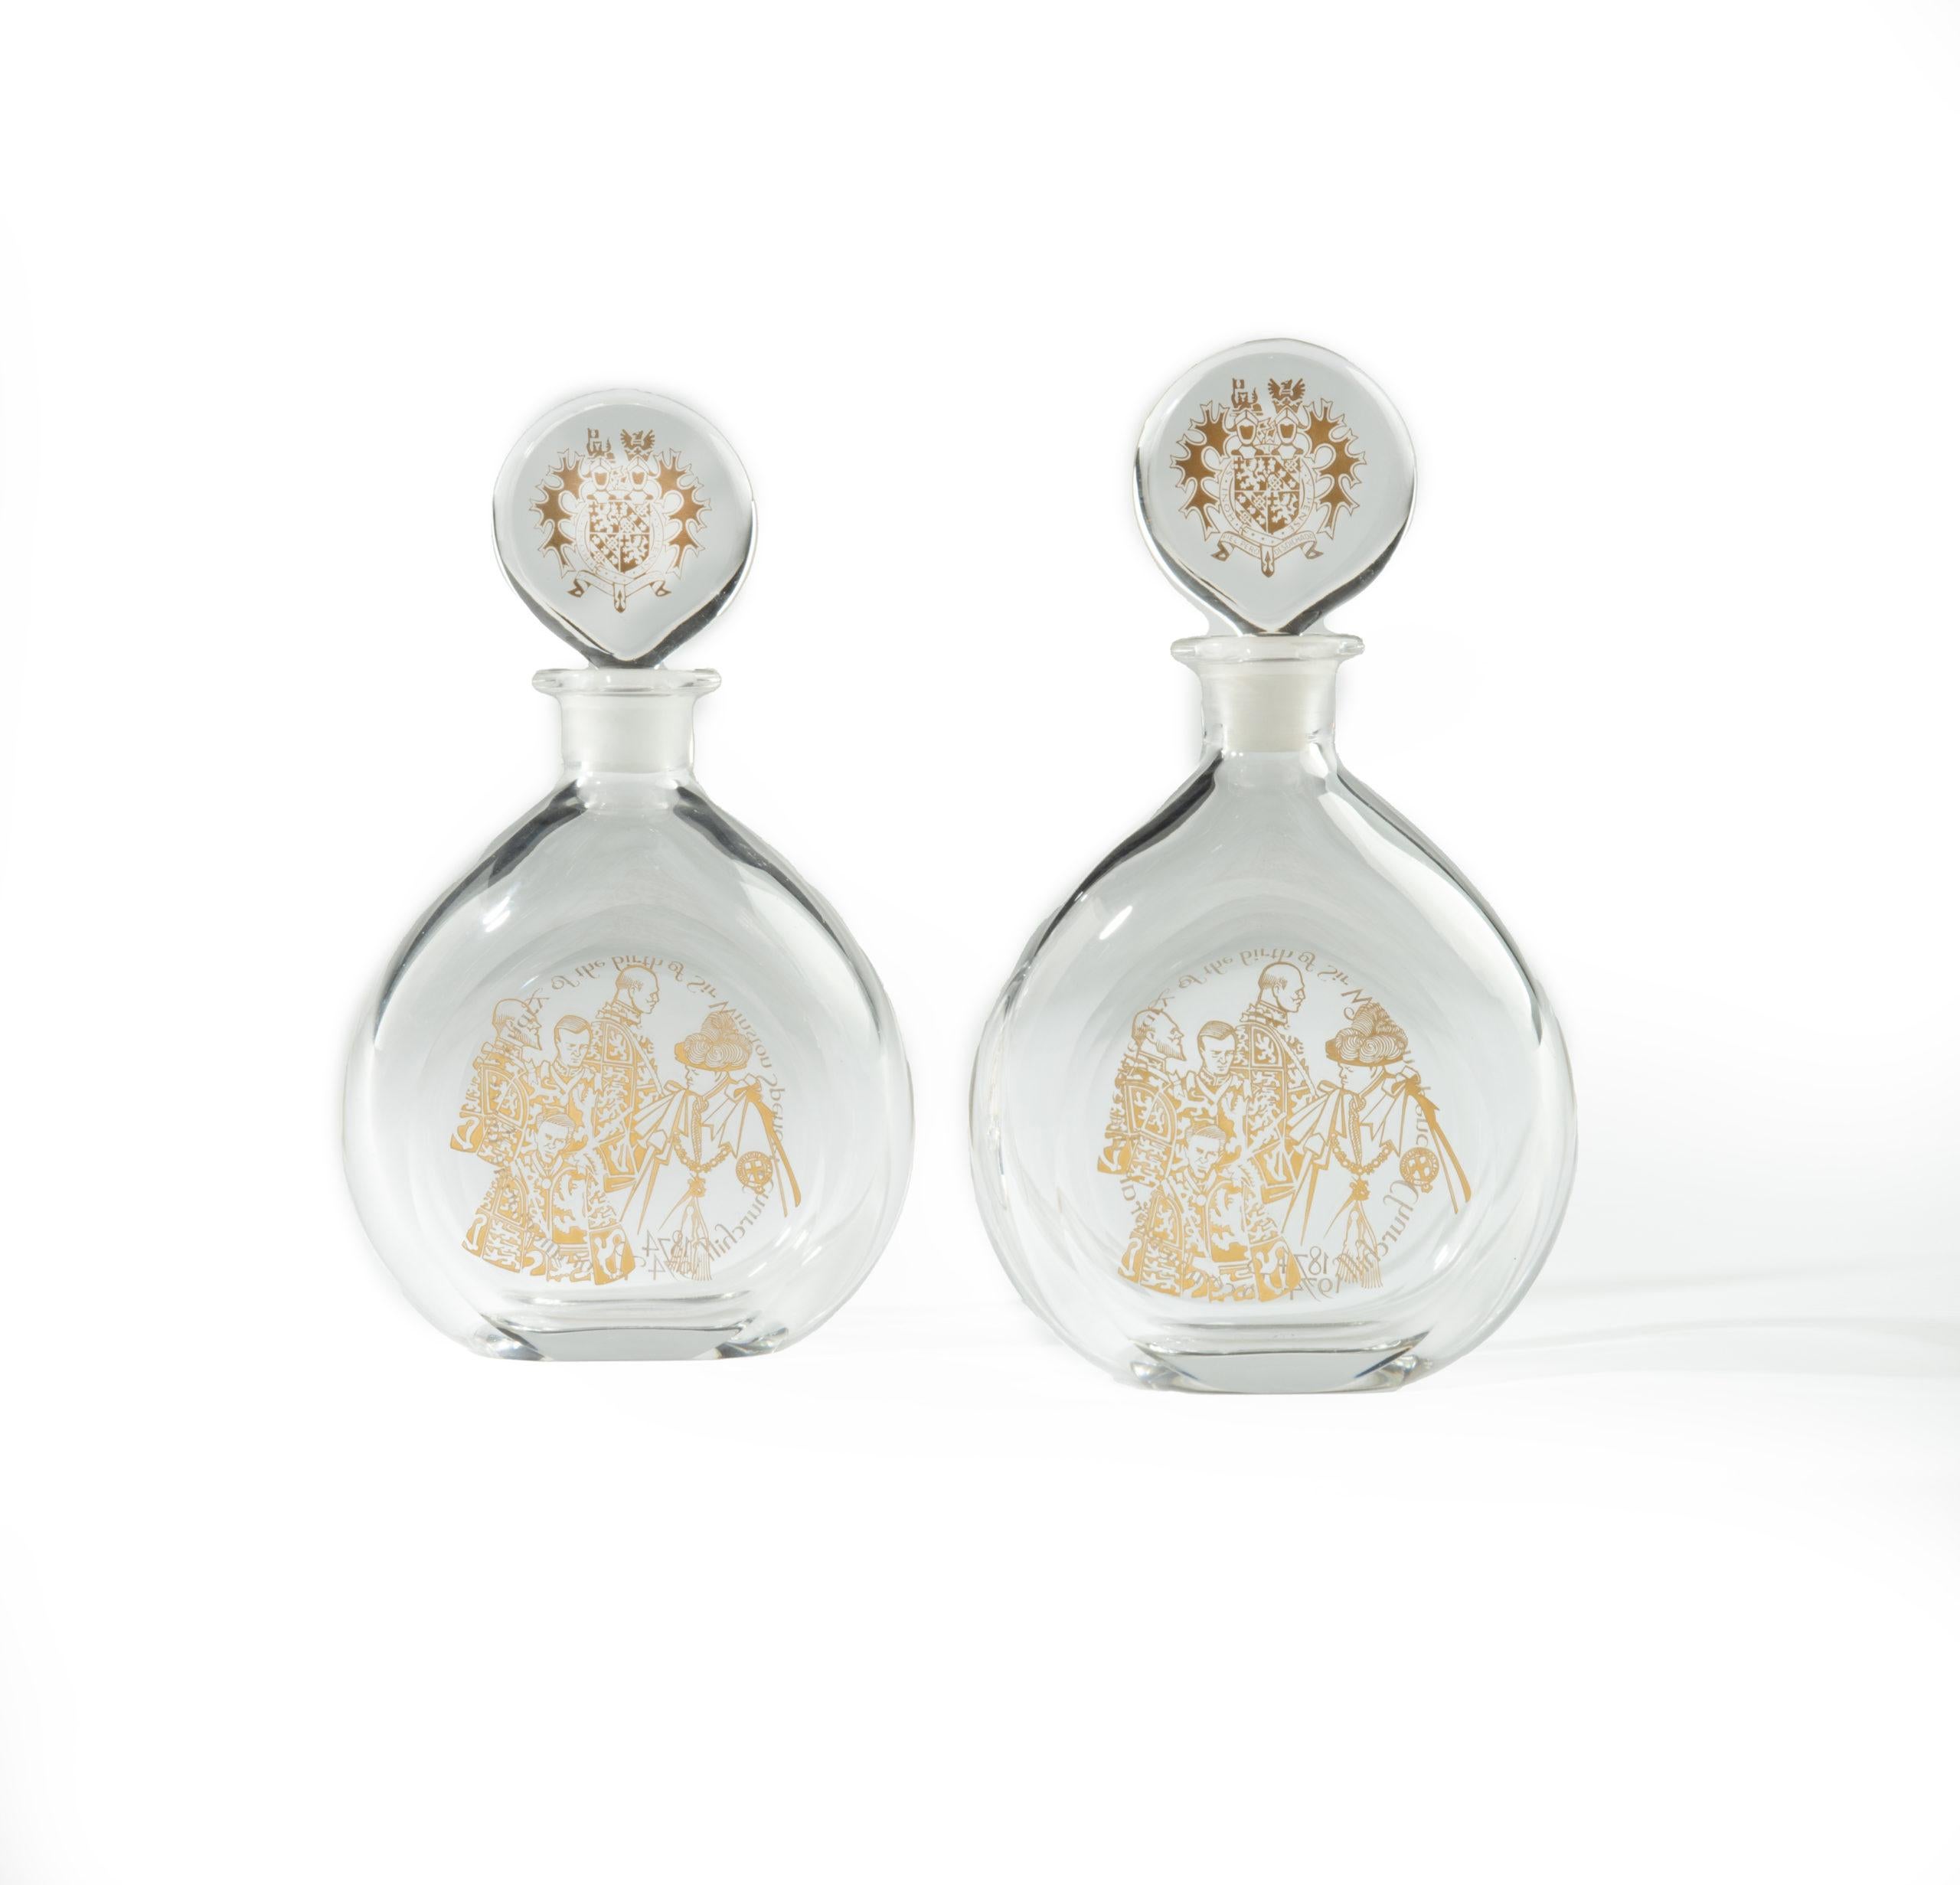 A pair of Sir Winston Churchill glass decanters, by Garrard & Co., 1974 In Good Condition For Sale In Lymington, Hampshire